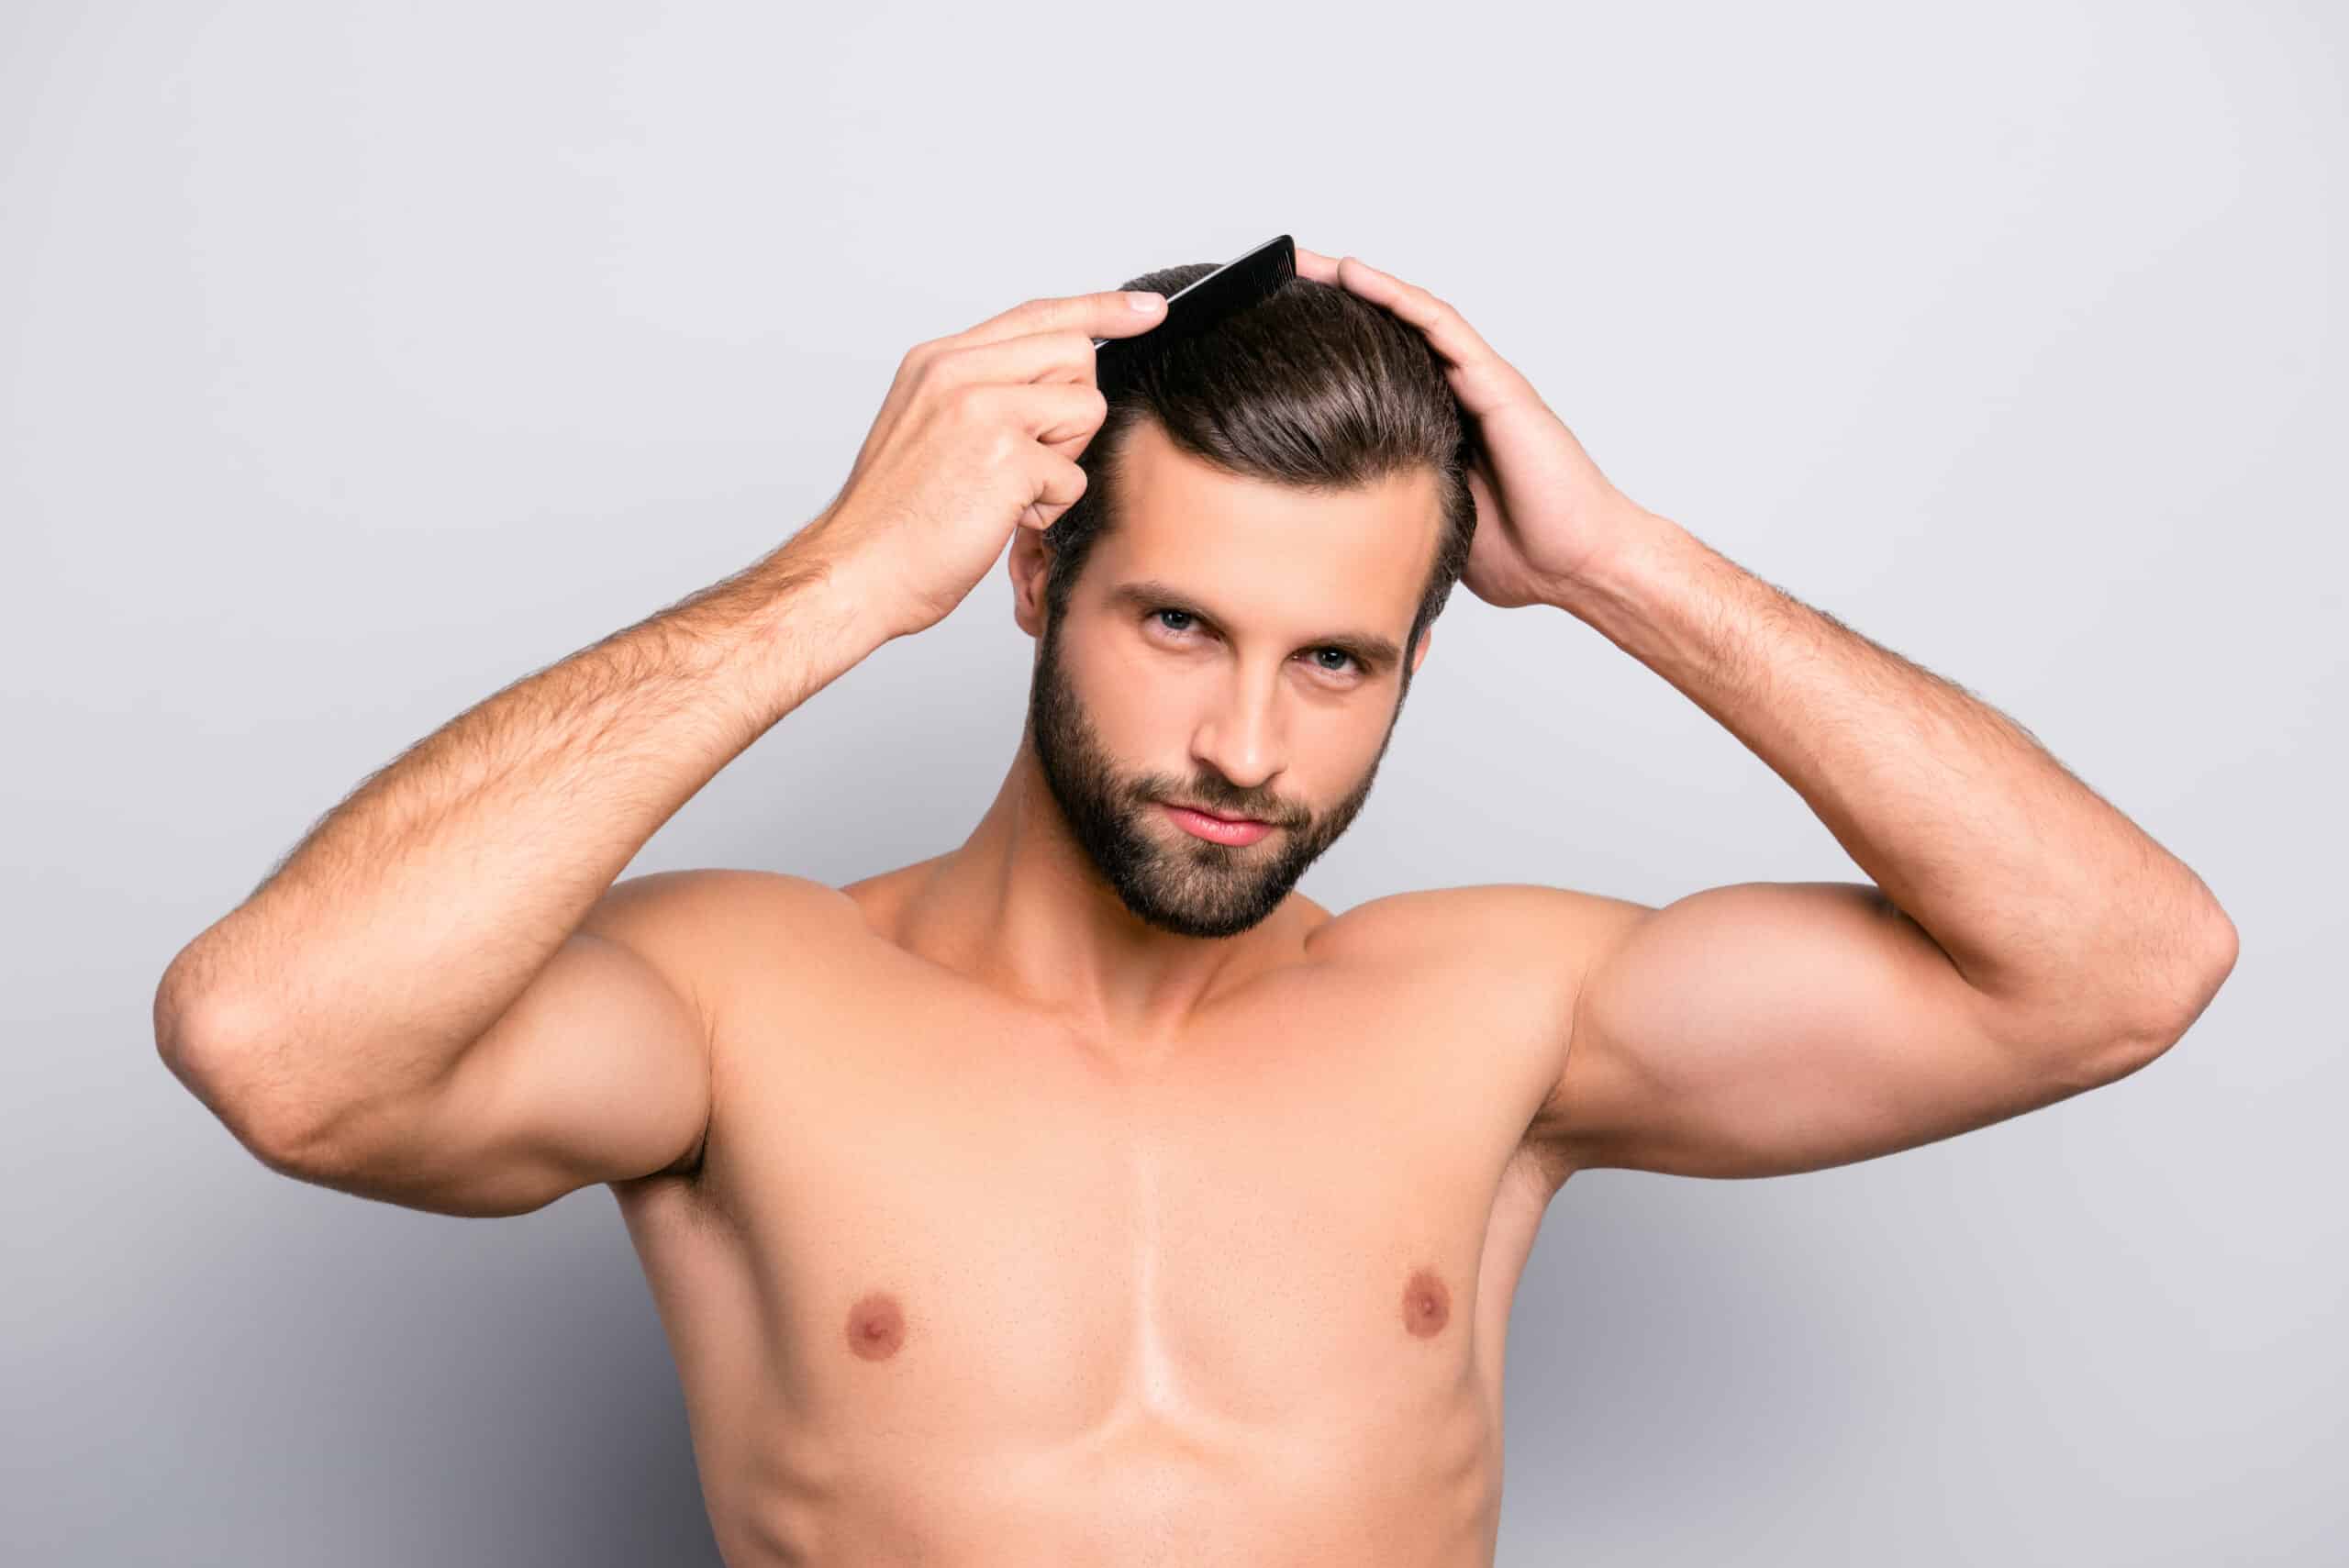 Does Creatine Cause Hair Loss? | What Does The Science Say?